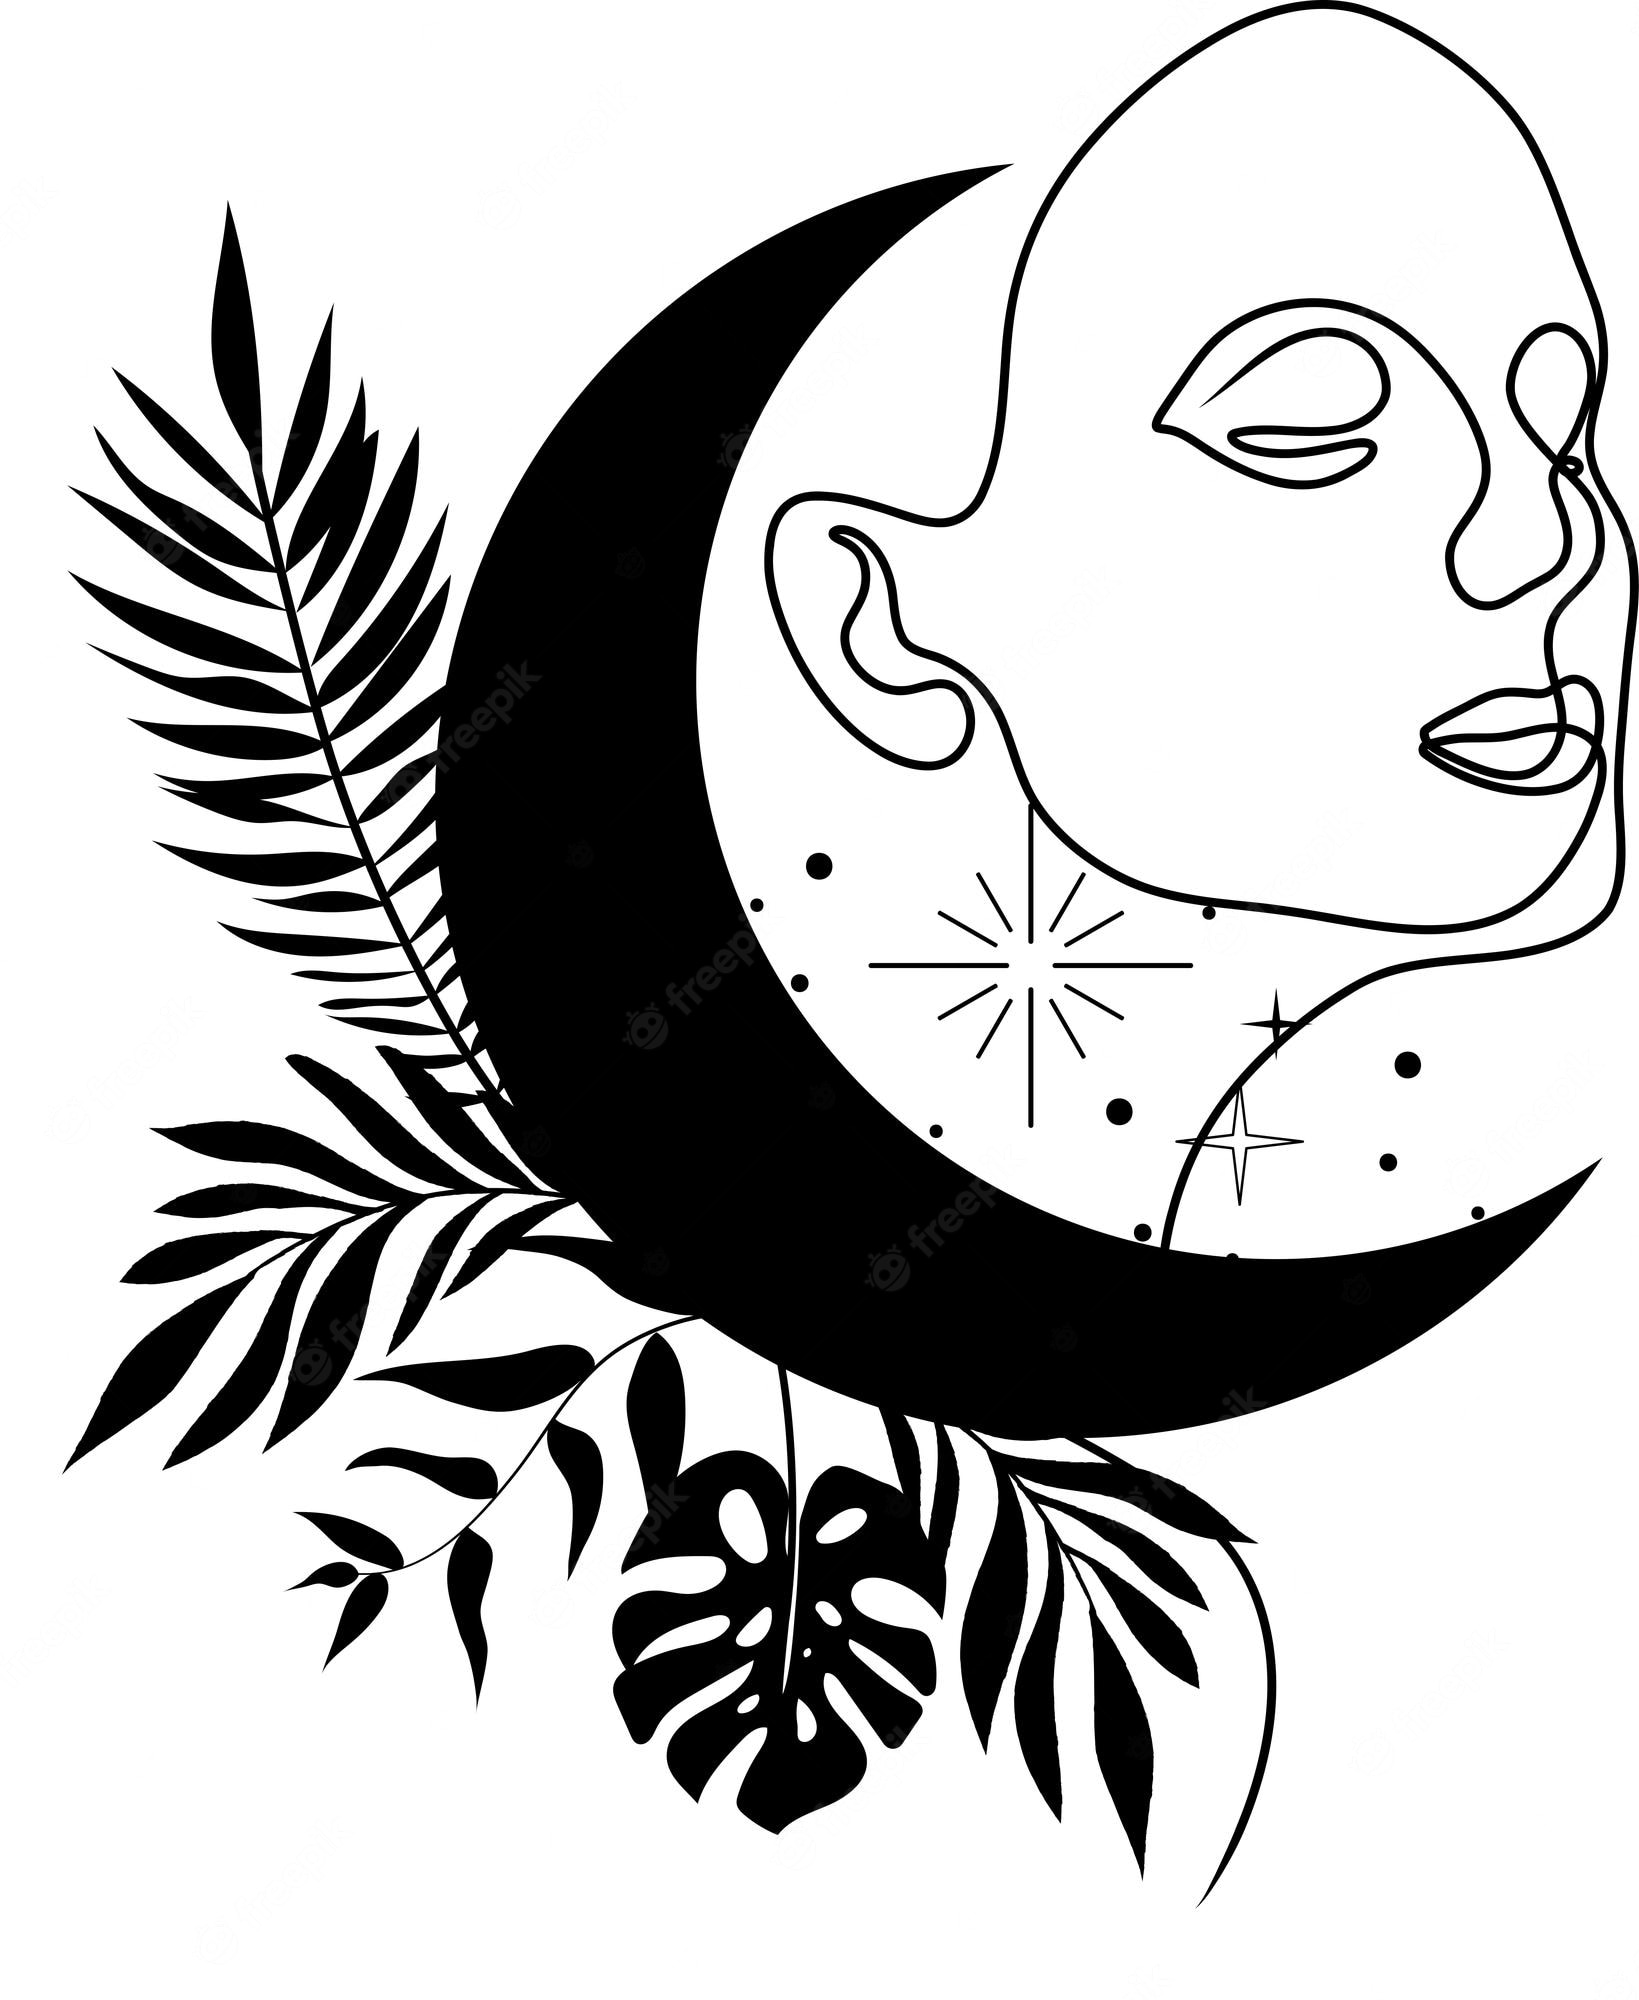 Crescent Moon silhouette.ai Royalty Free Stock SVG Vector and Clip Art ...